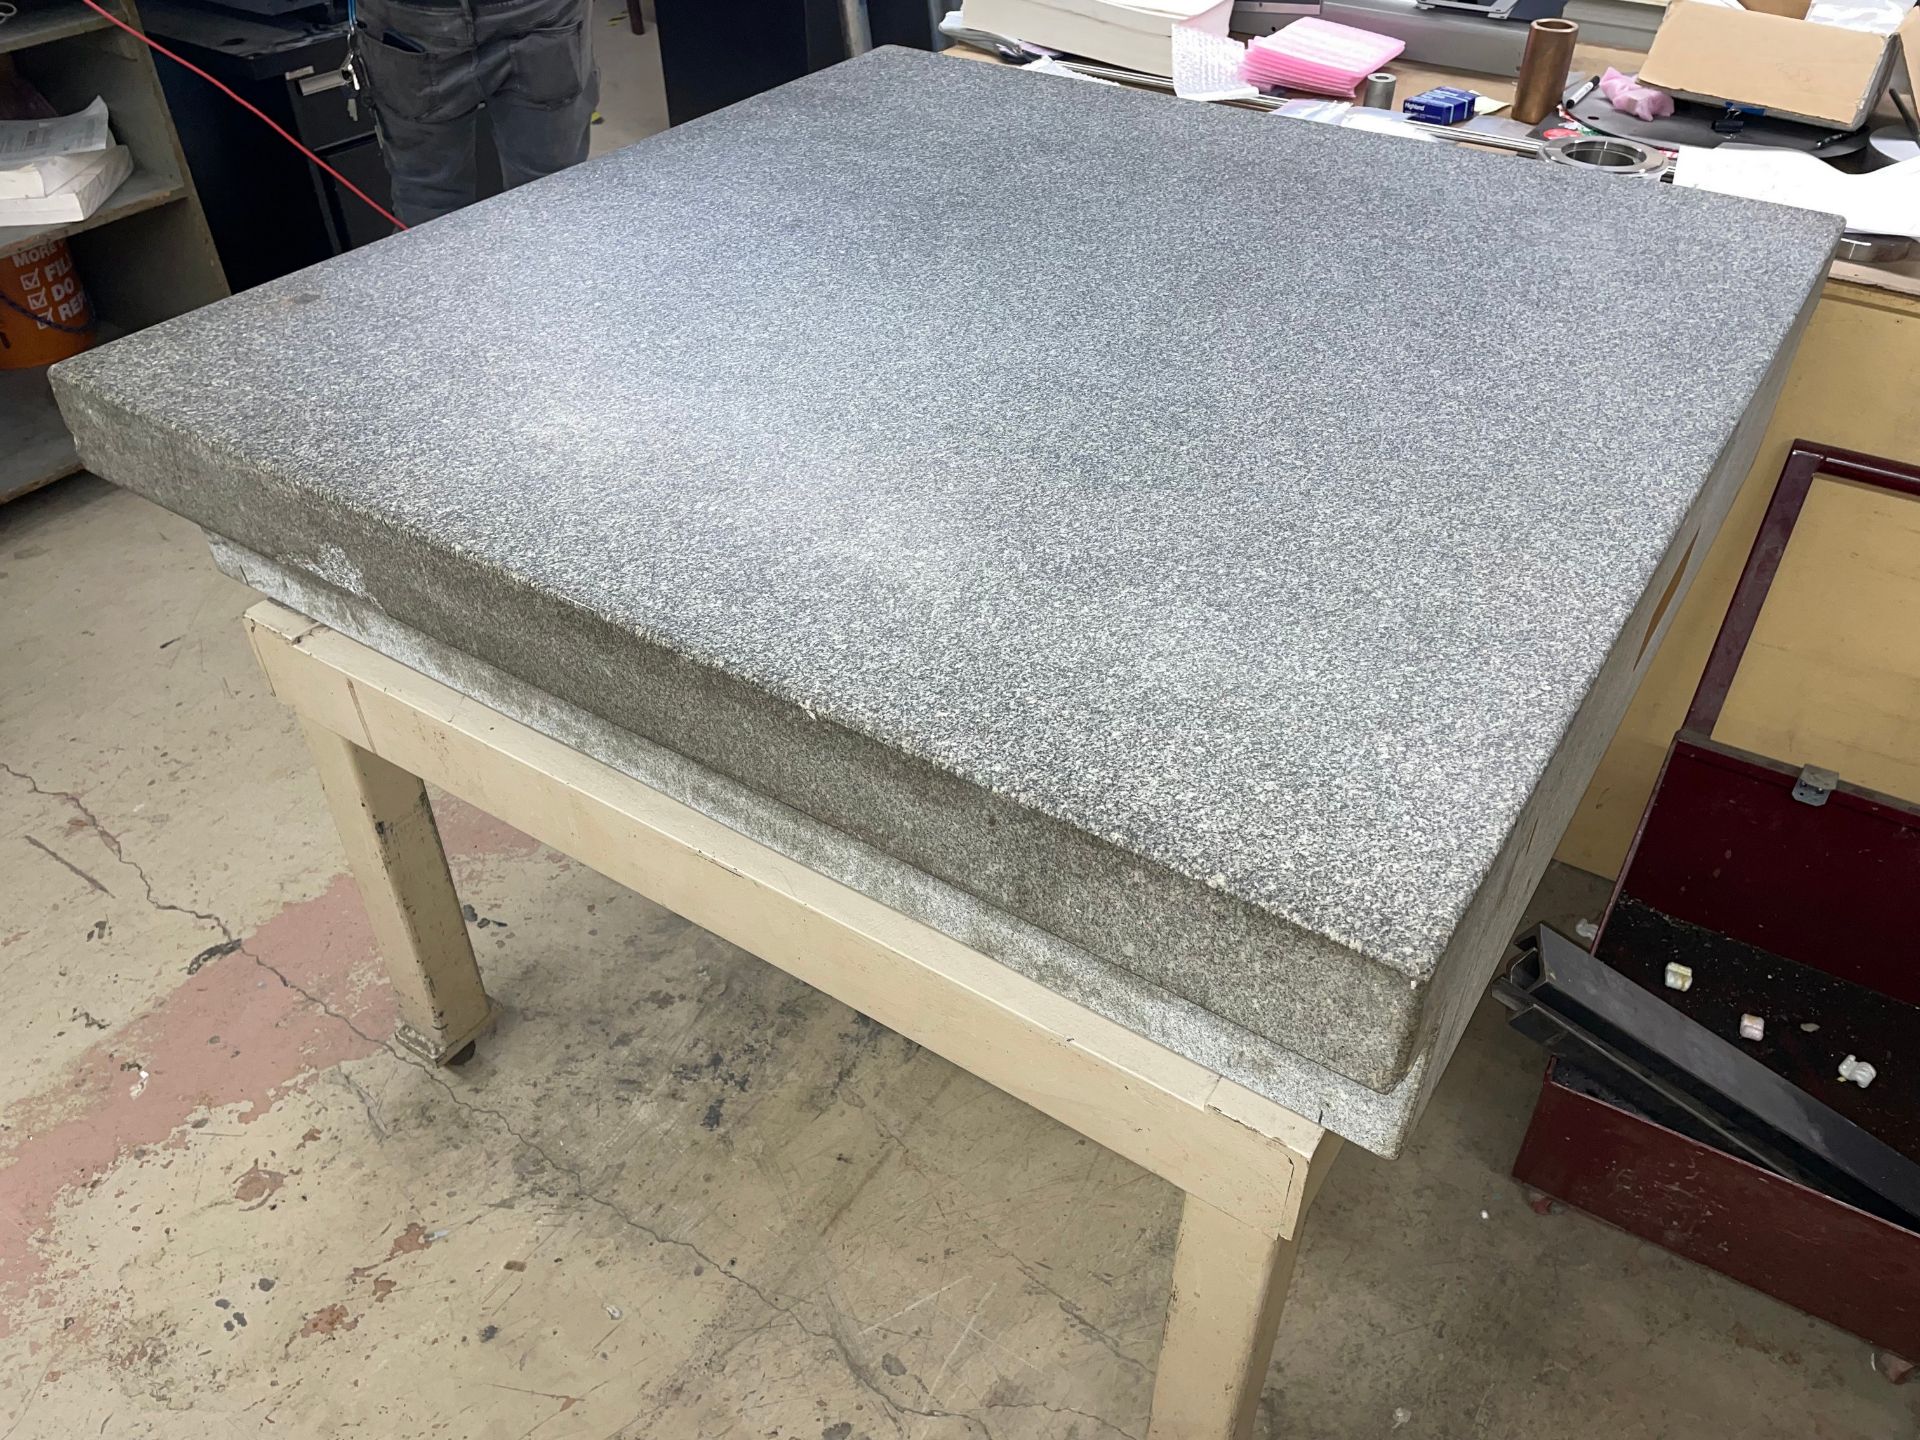 Granite 48" x 48" Surface Plate with Stand - Image 2 of 2